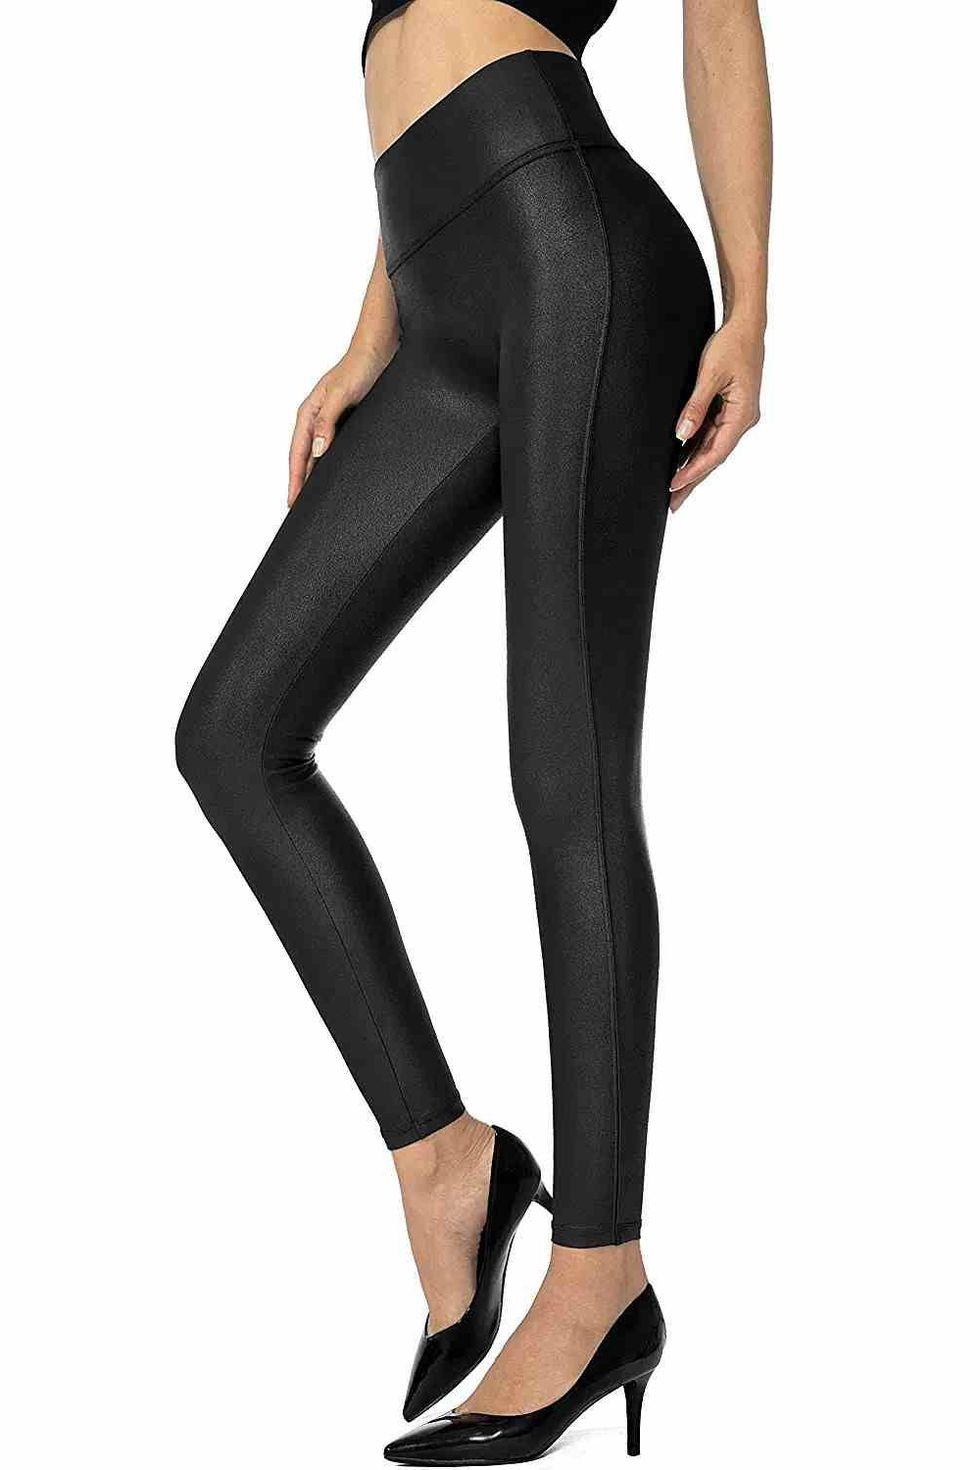 Ginasy Faux Leather Leggings Pants Stretchy High Waisted Tights